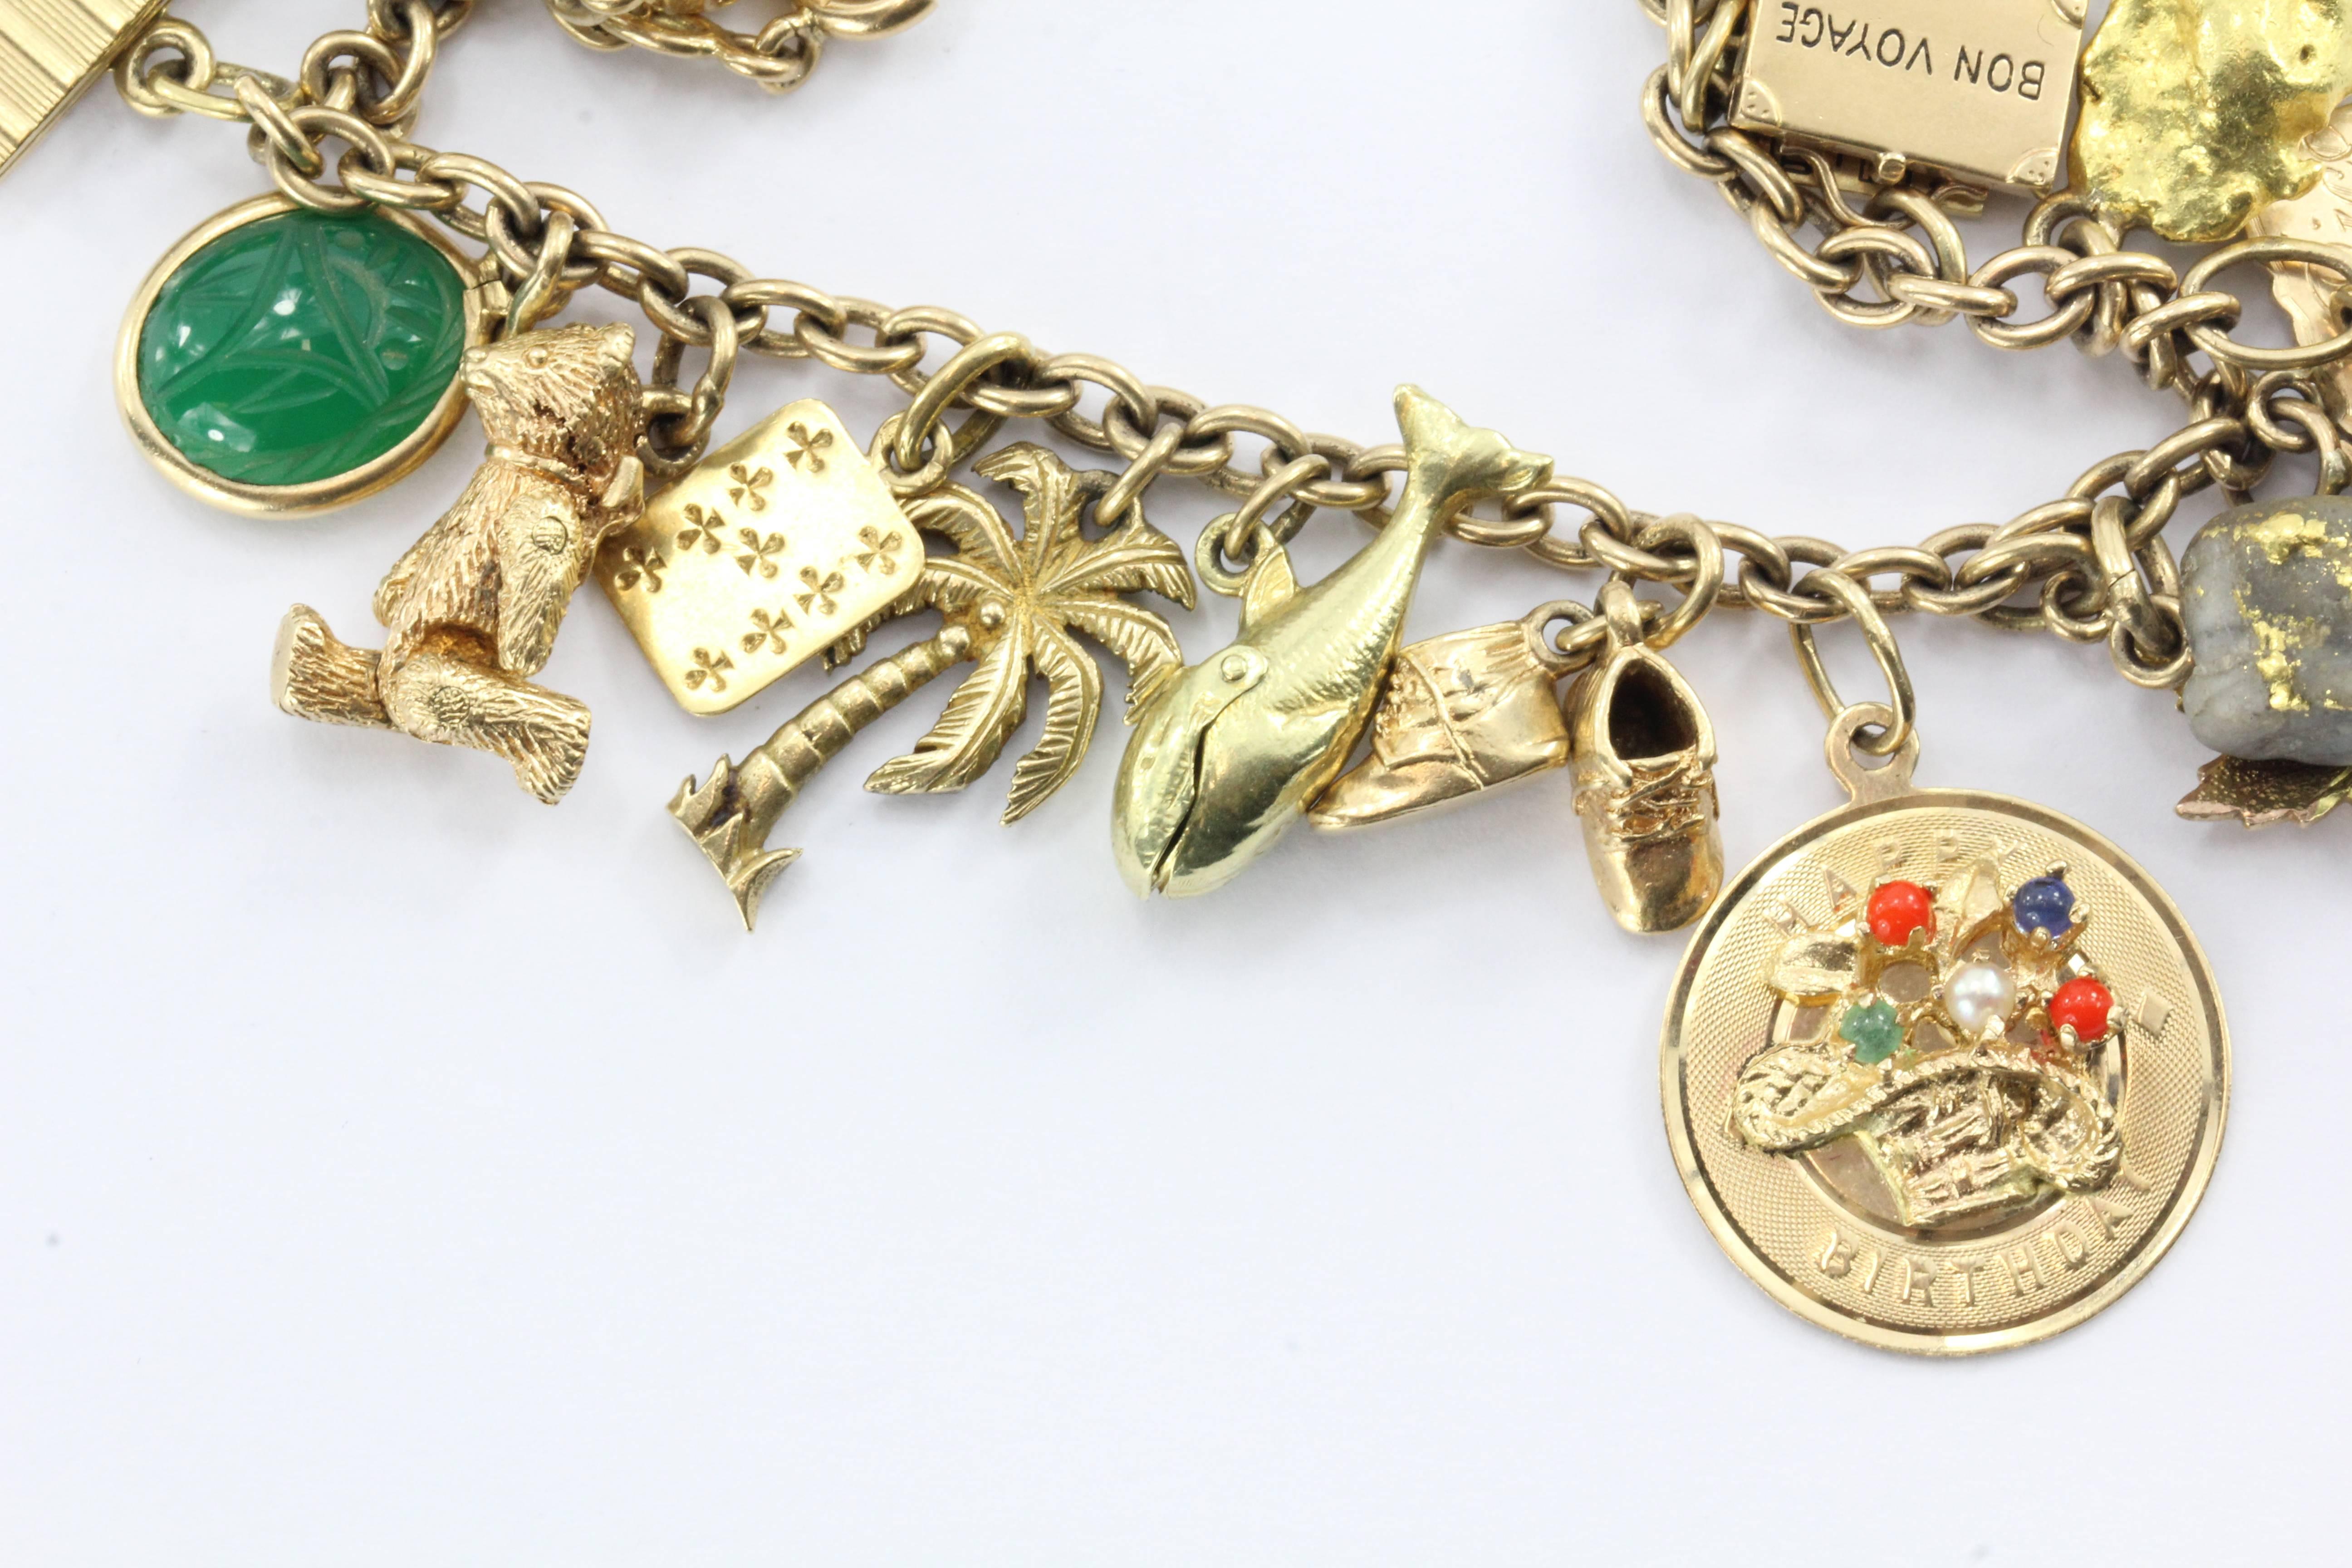 Antique 1940's 14k Gold Loaded 26 Charm Bracelet w Cartier & Tiffany Co Charm. The bracelet is in excellent estate condition and ready to wear. The piece dates from either World War II or the Korean War 1940 - 1955. 

The bracelet measures 7.5